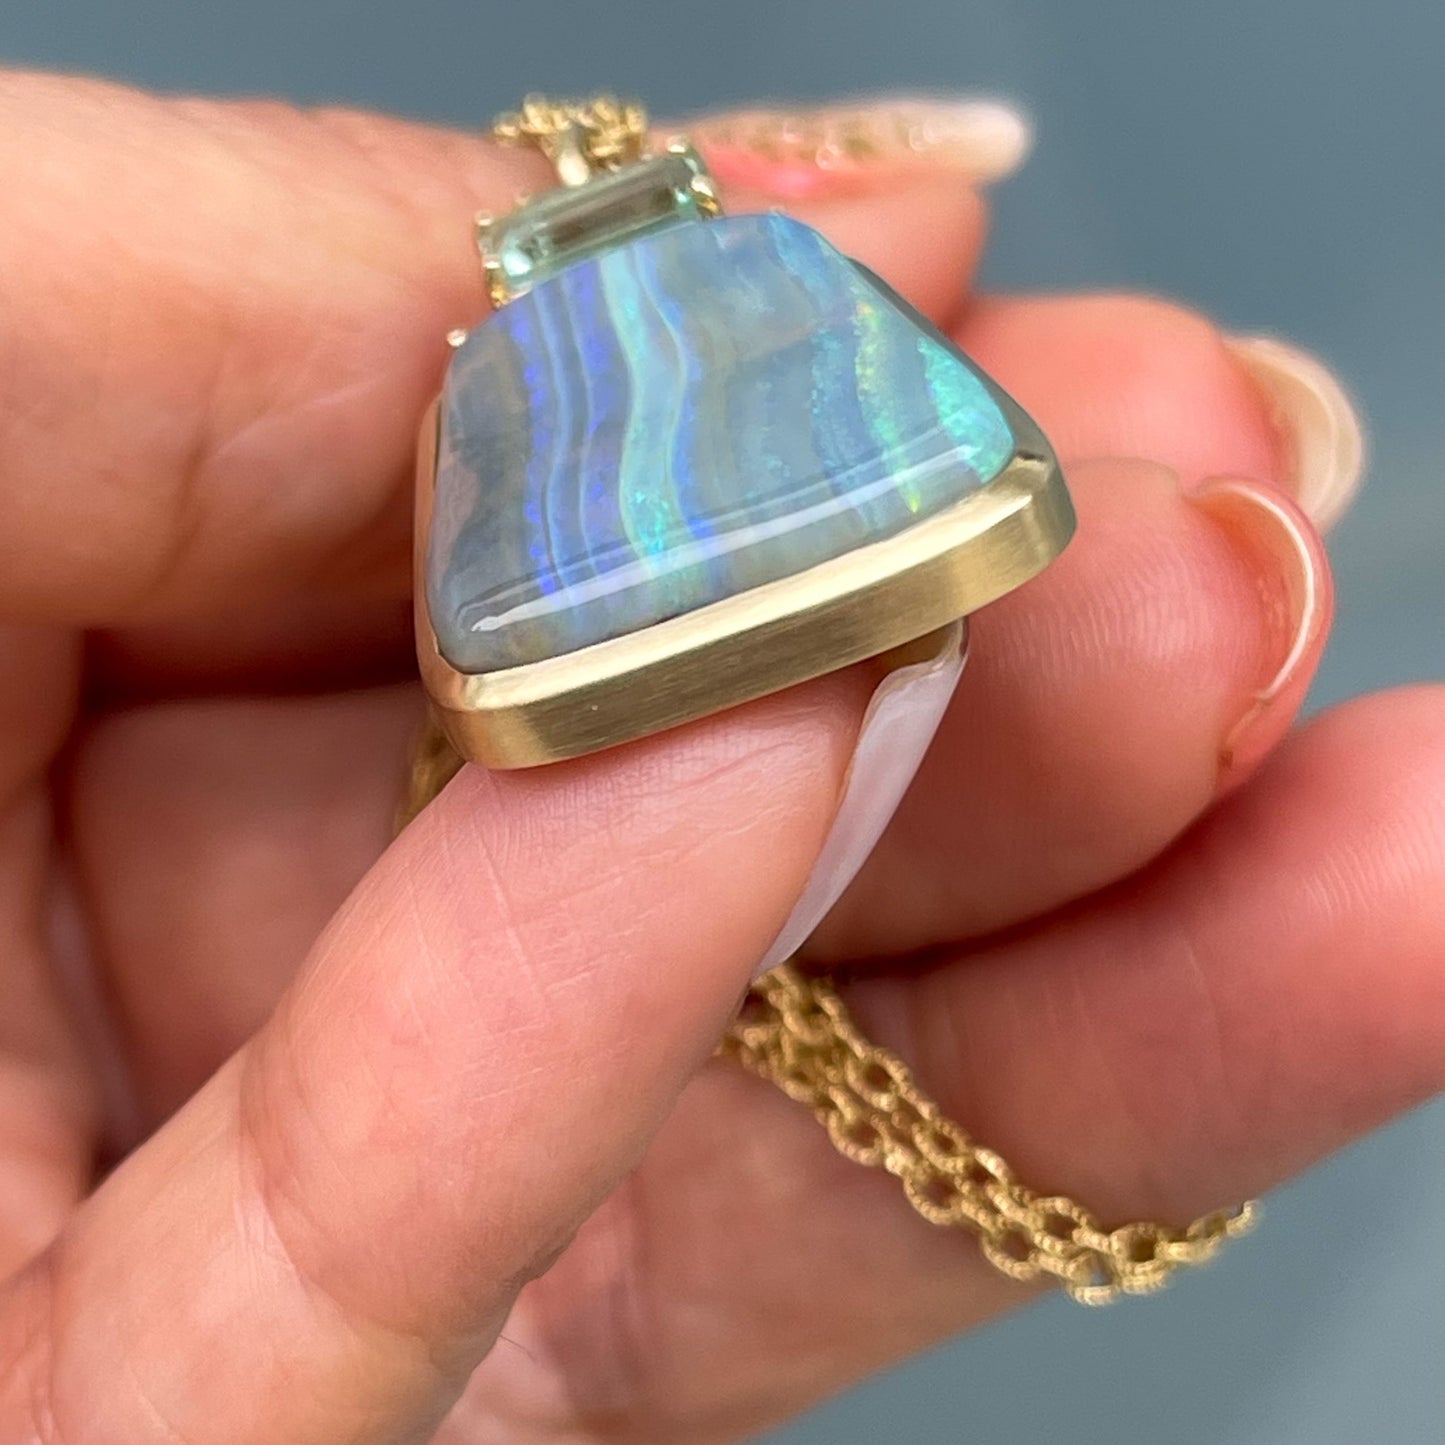 An Australian Opal Necklace by NIXIN Jewelry shown from the end to display the clean bezel setting of the blue opal.